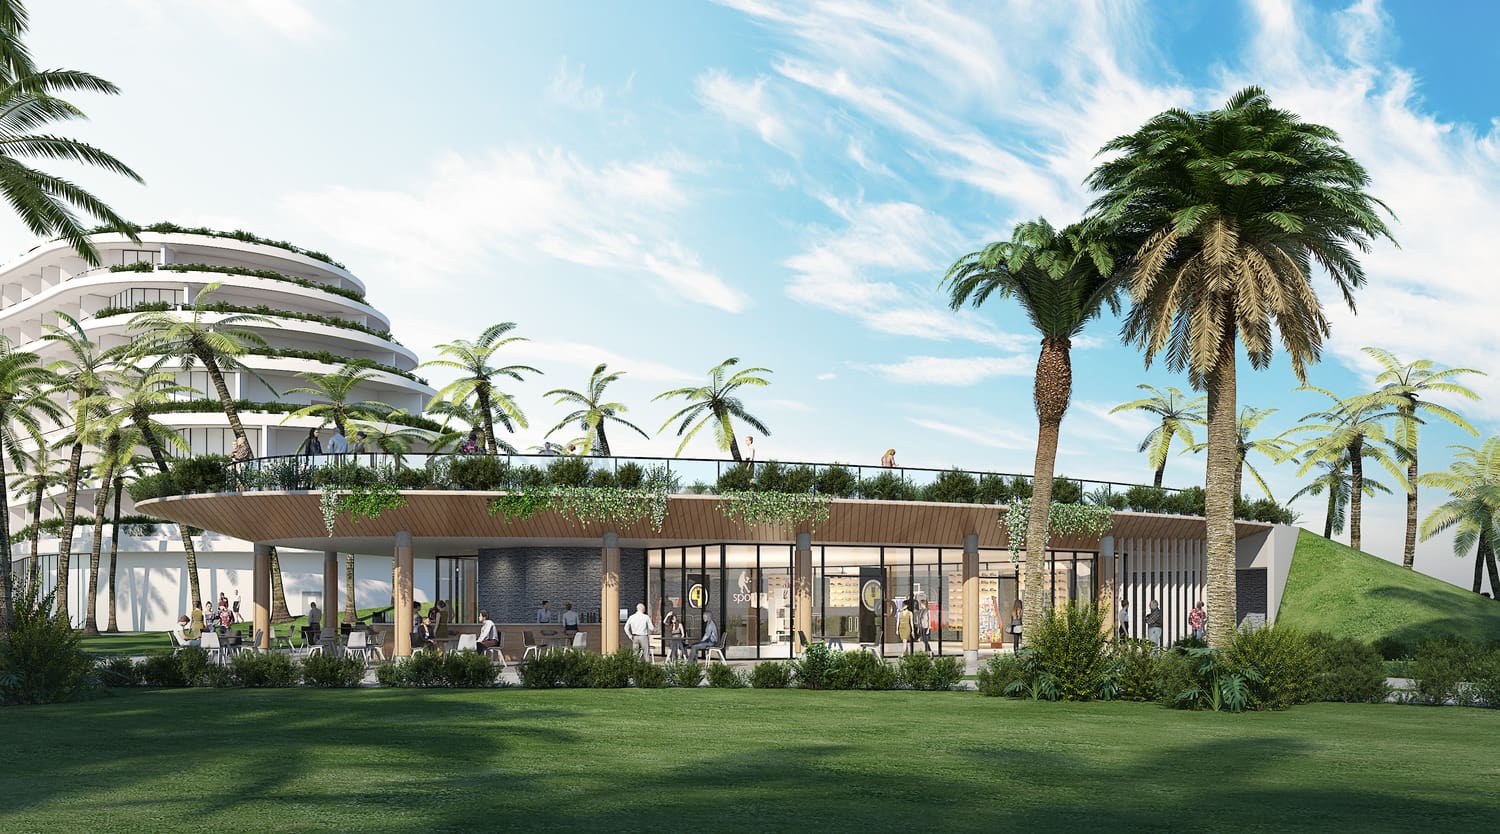 rendered image of hotel exterior from the side